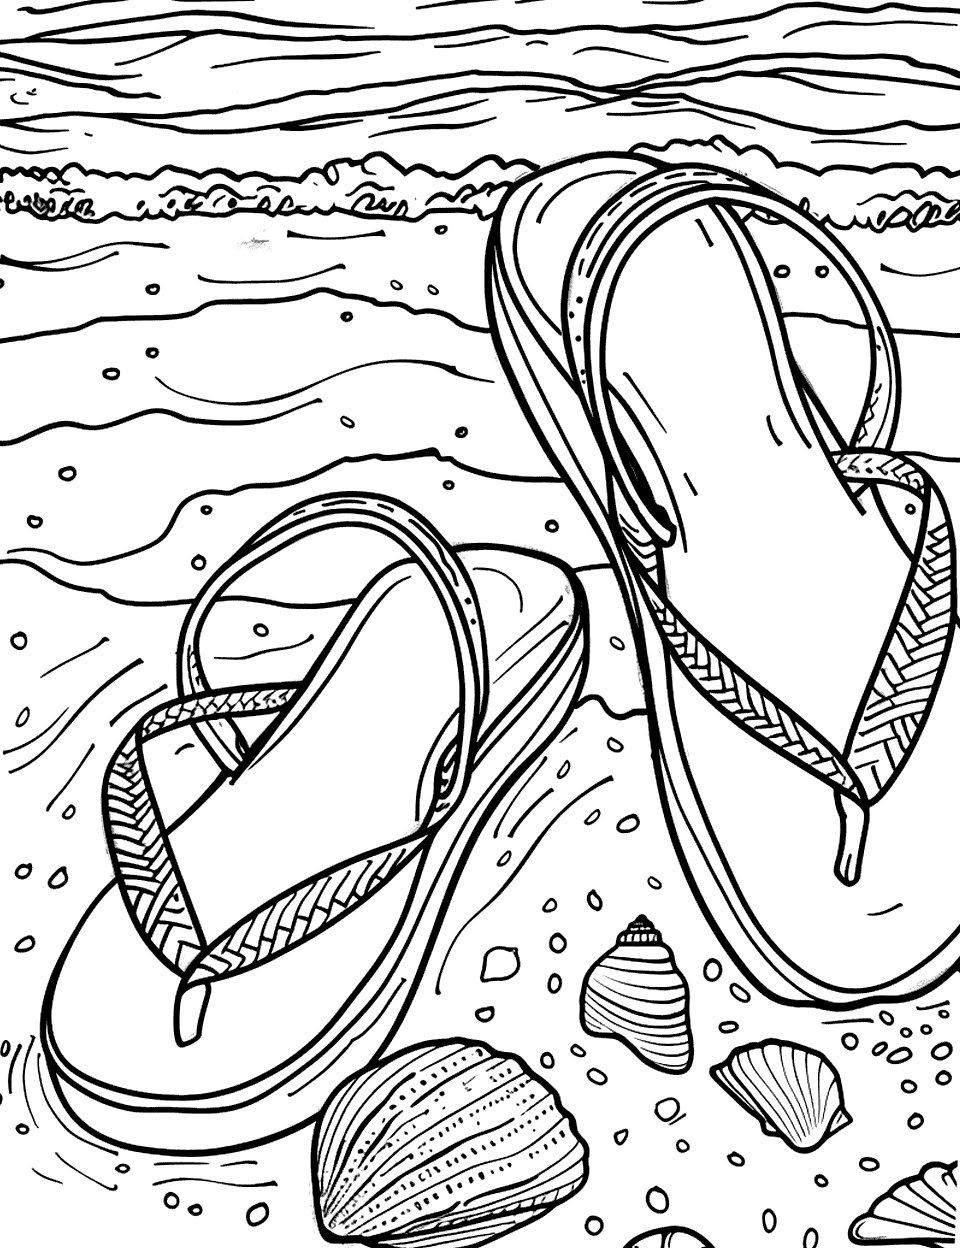 Beach Sandals on the Shore Shoe Coloring Page - Flip-flops in the sand near a beach and seashells with gentle waves in the distance.